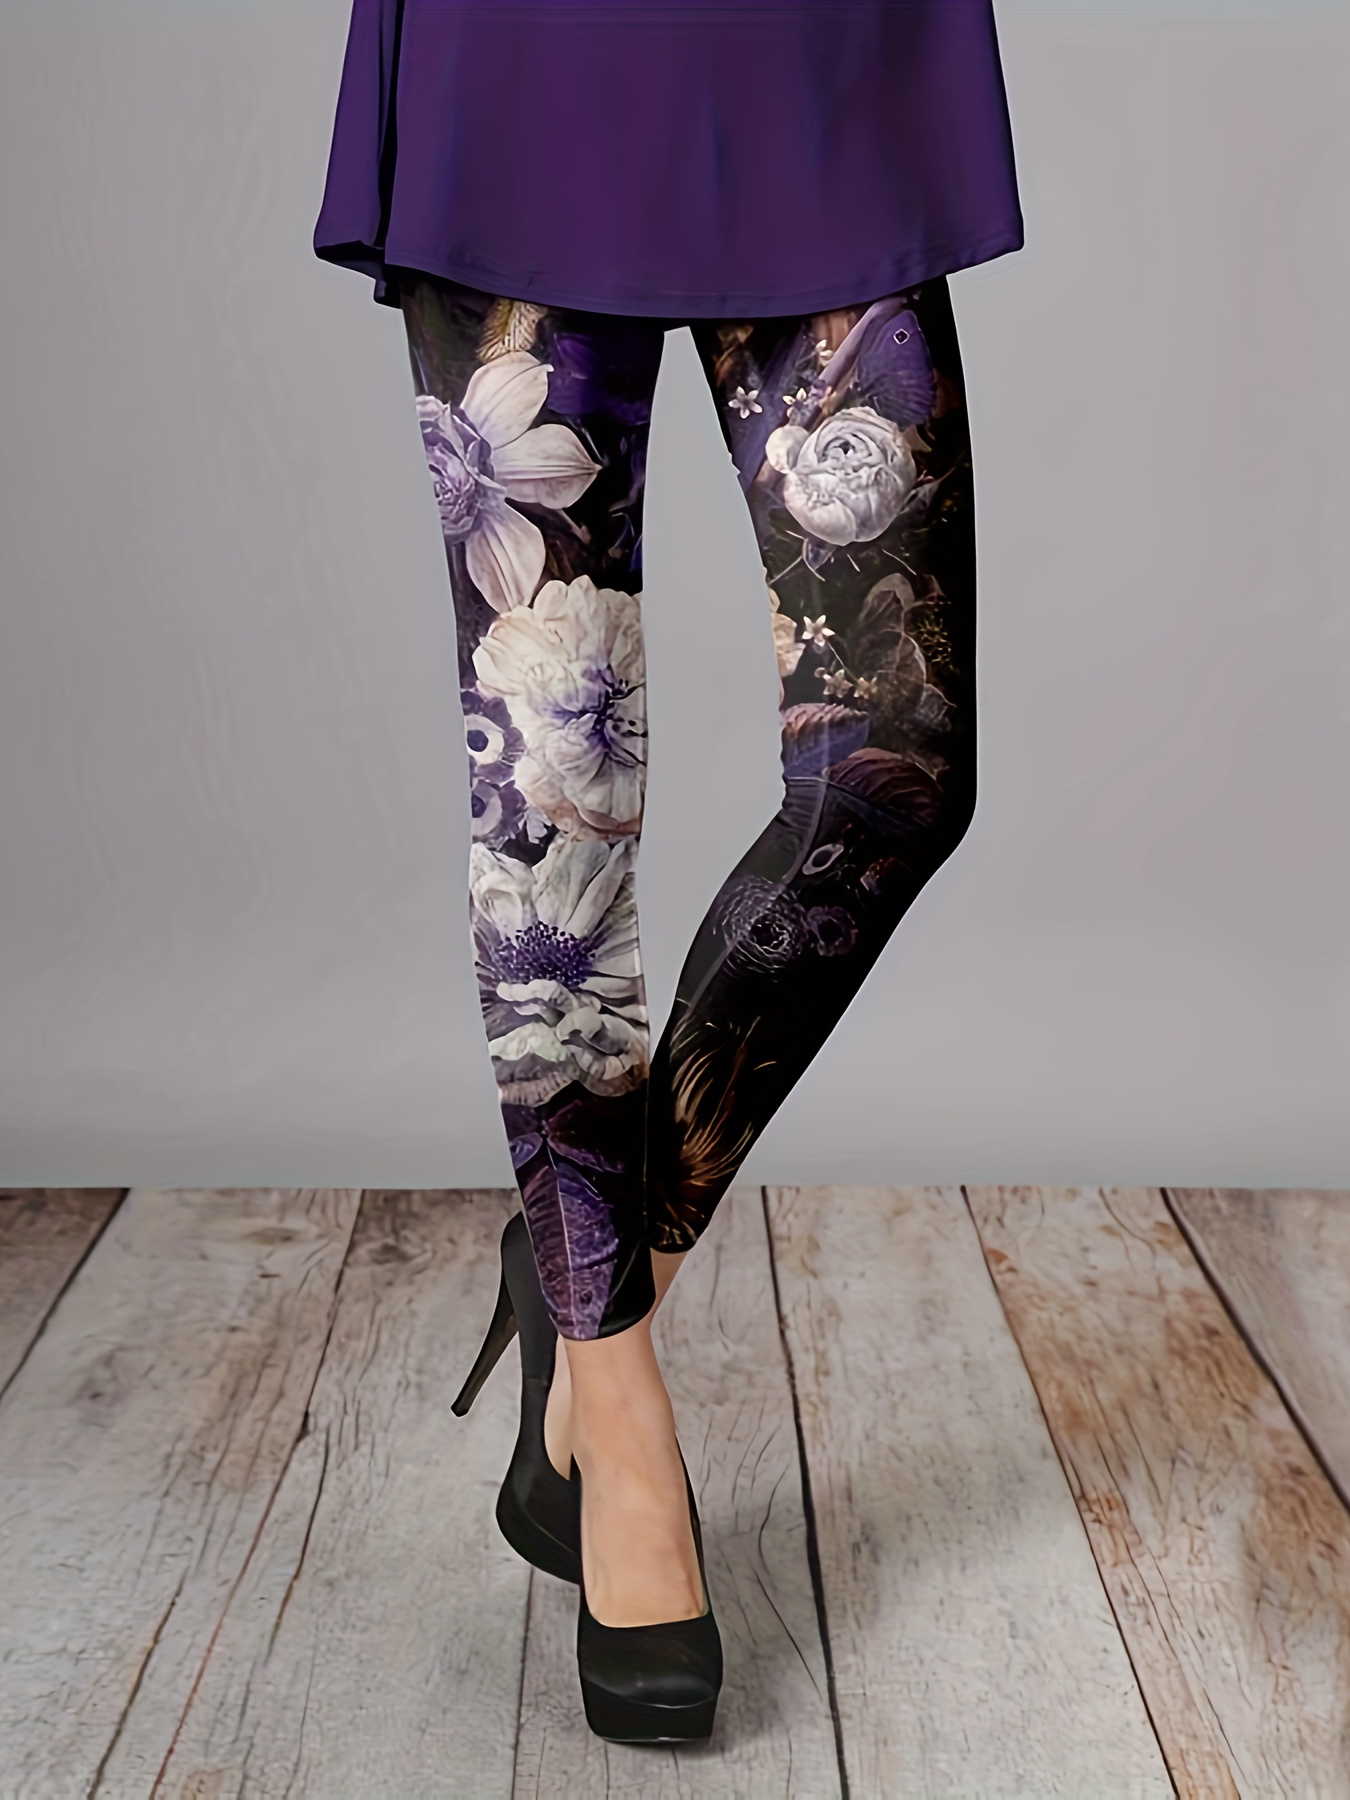 Sexy Skinny Stretchy Foot Pants For Women Body Shaping Purple Leggings For  Spring, Casual Streetwear And Wild Female Bottoms 211215 From Luo02, $10.38